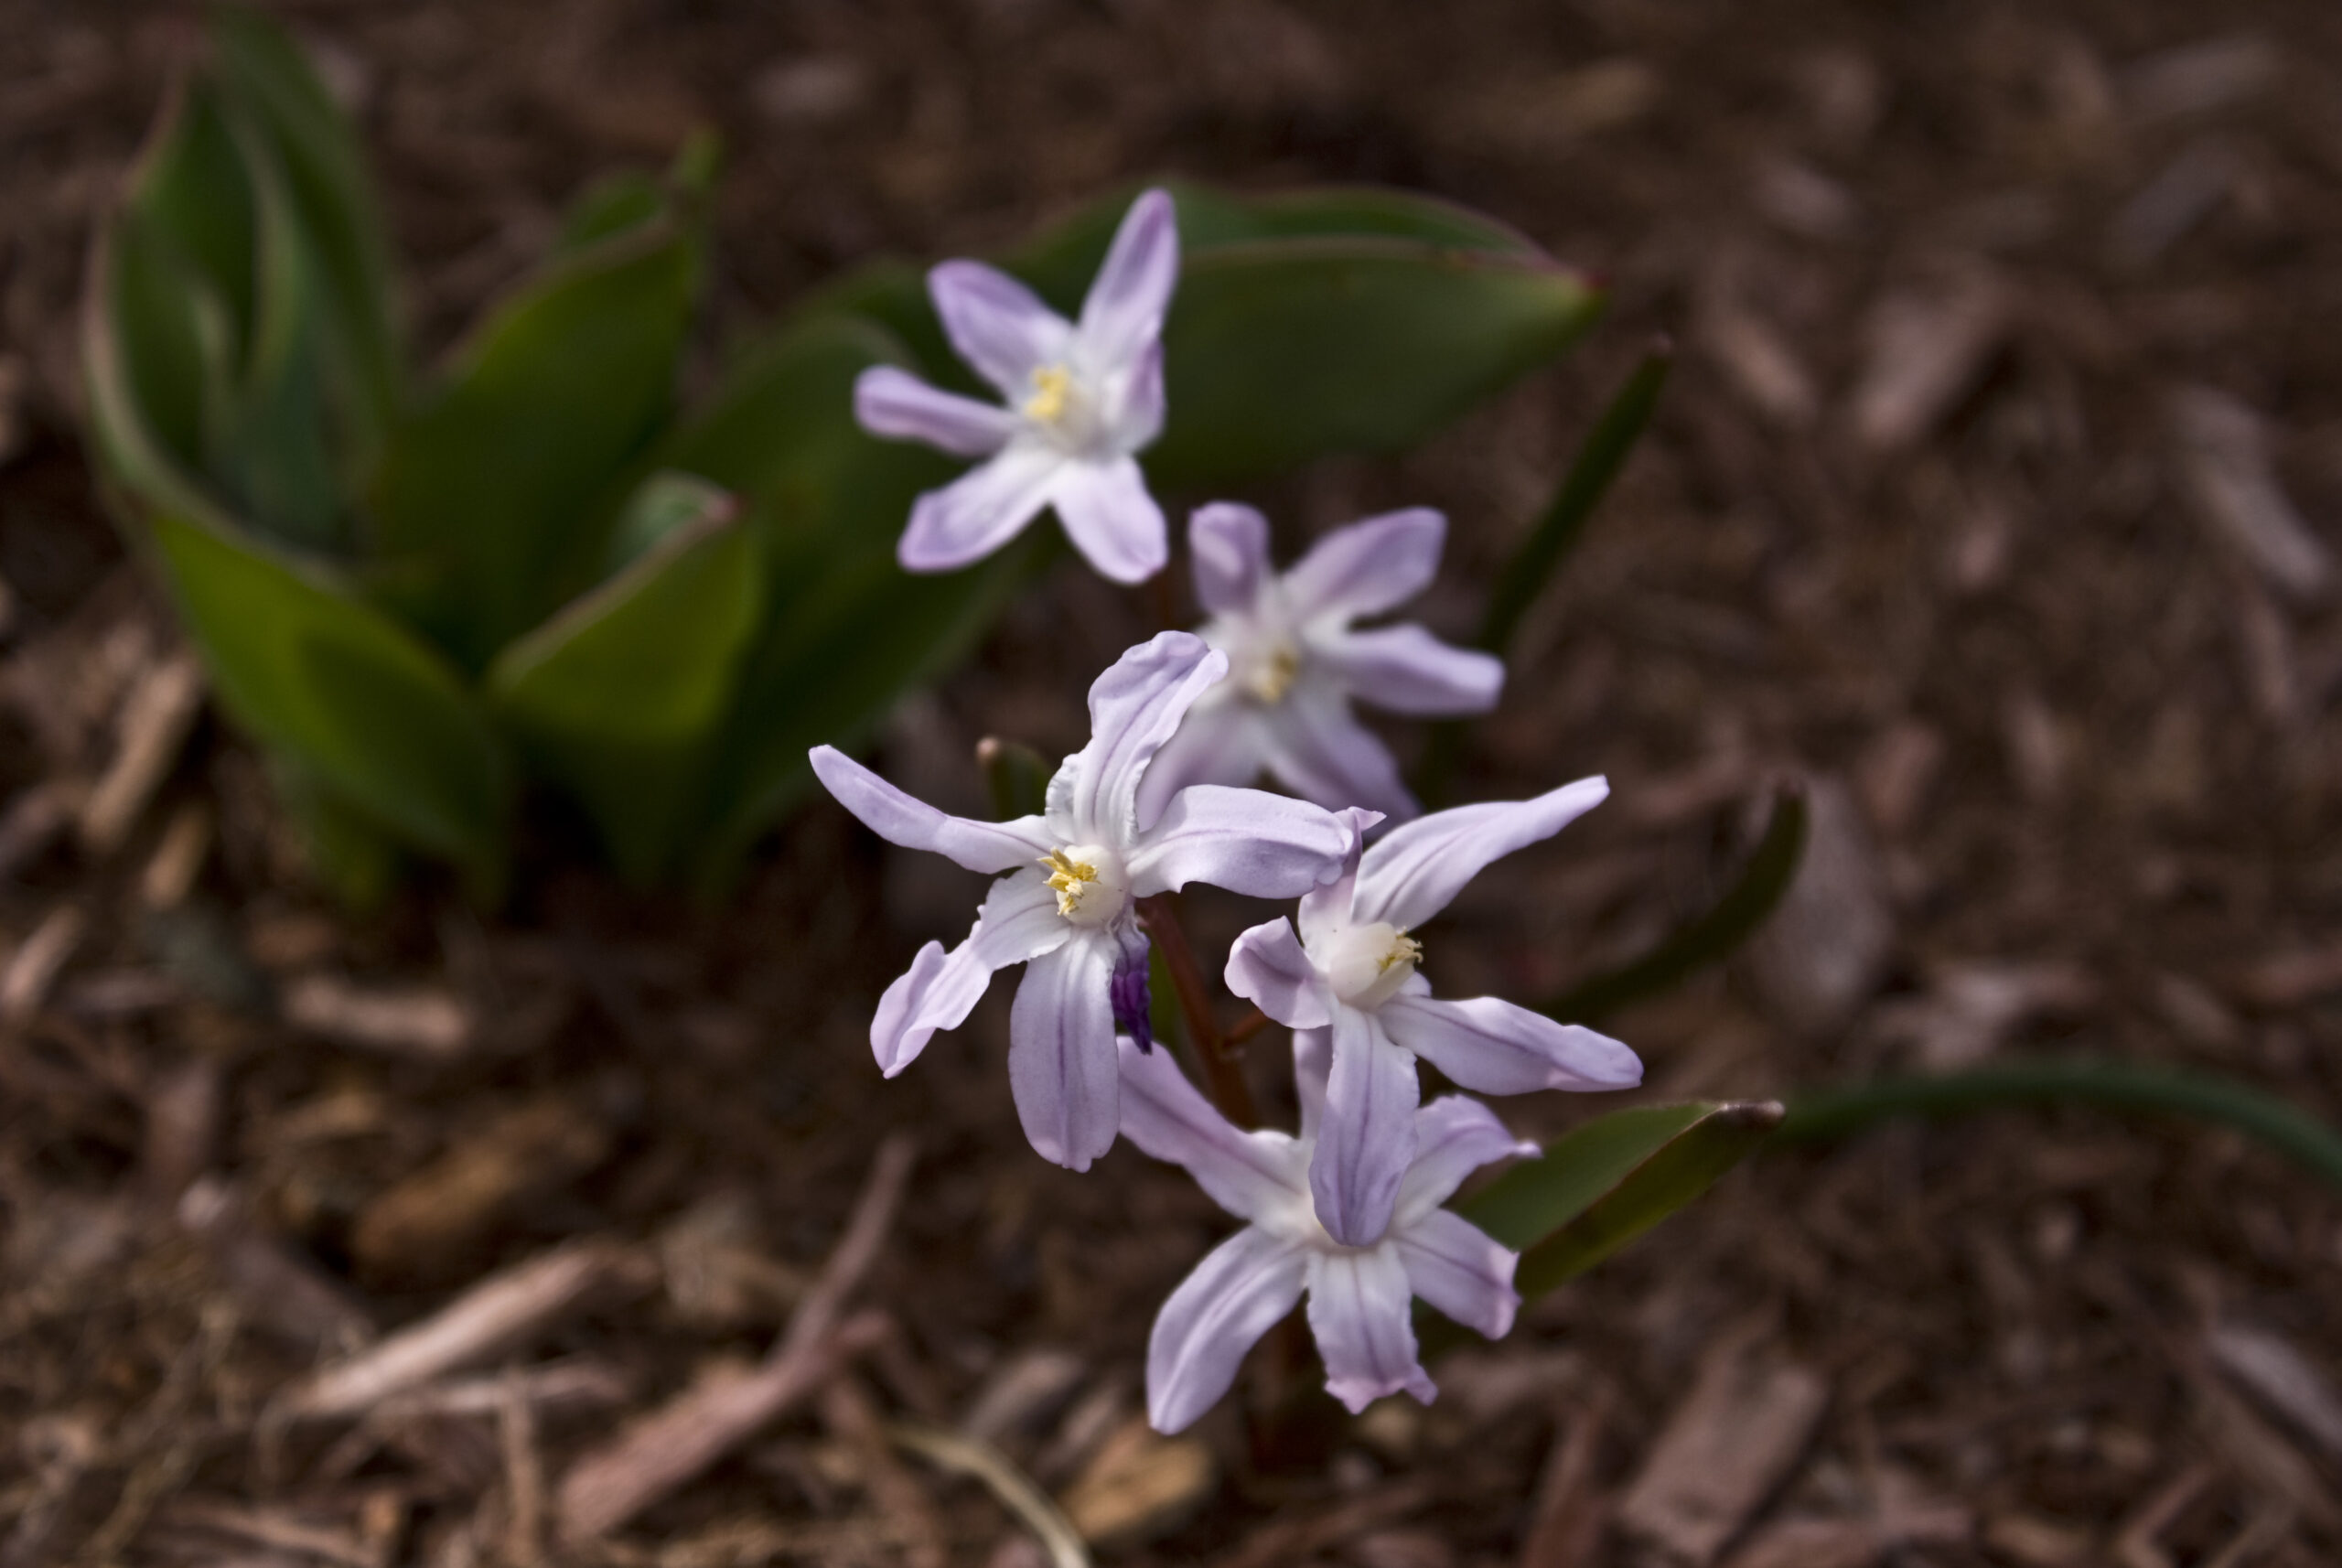 Early Spring Flowers